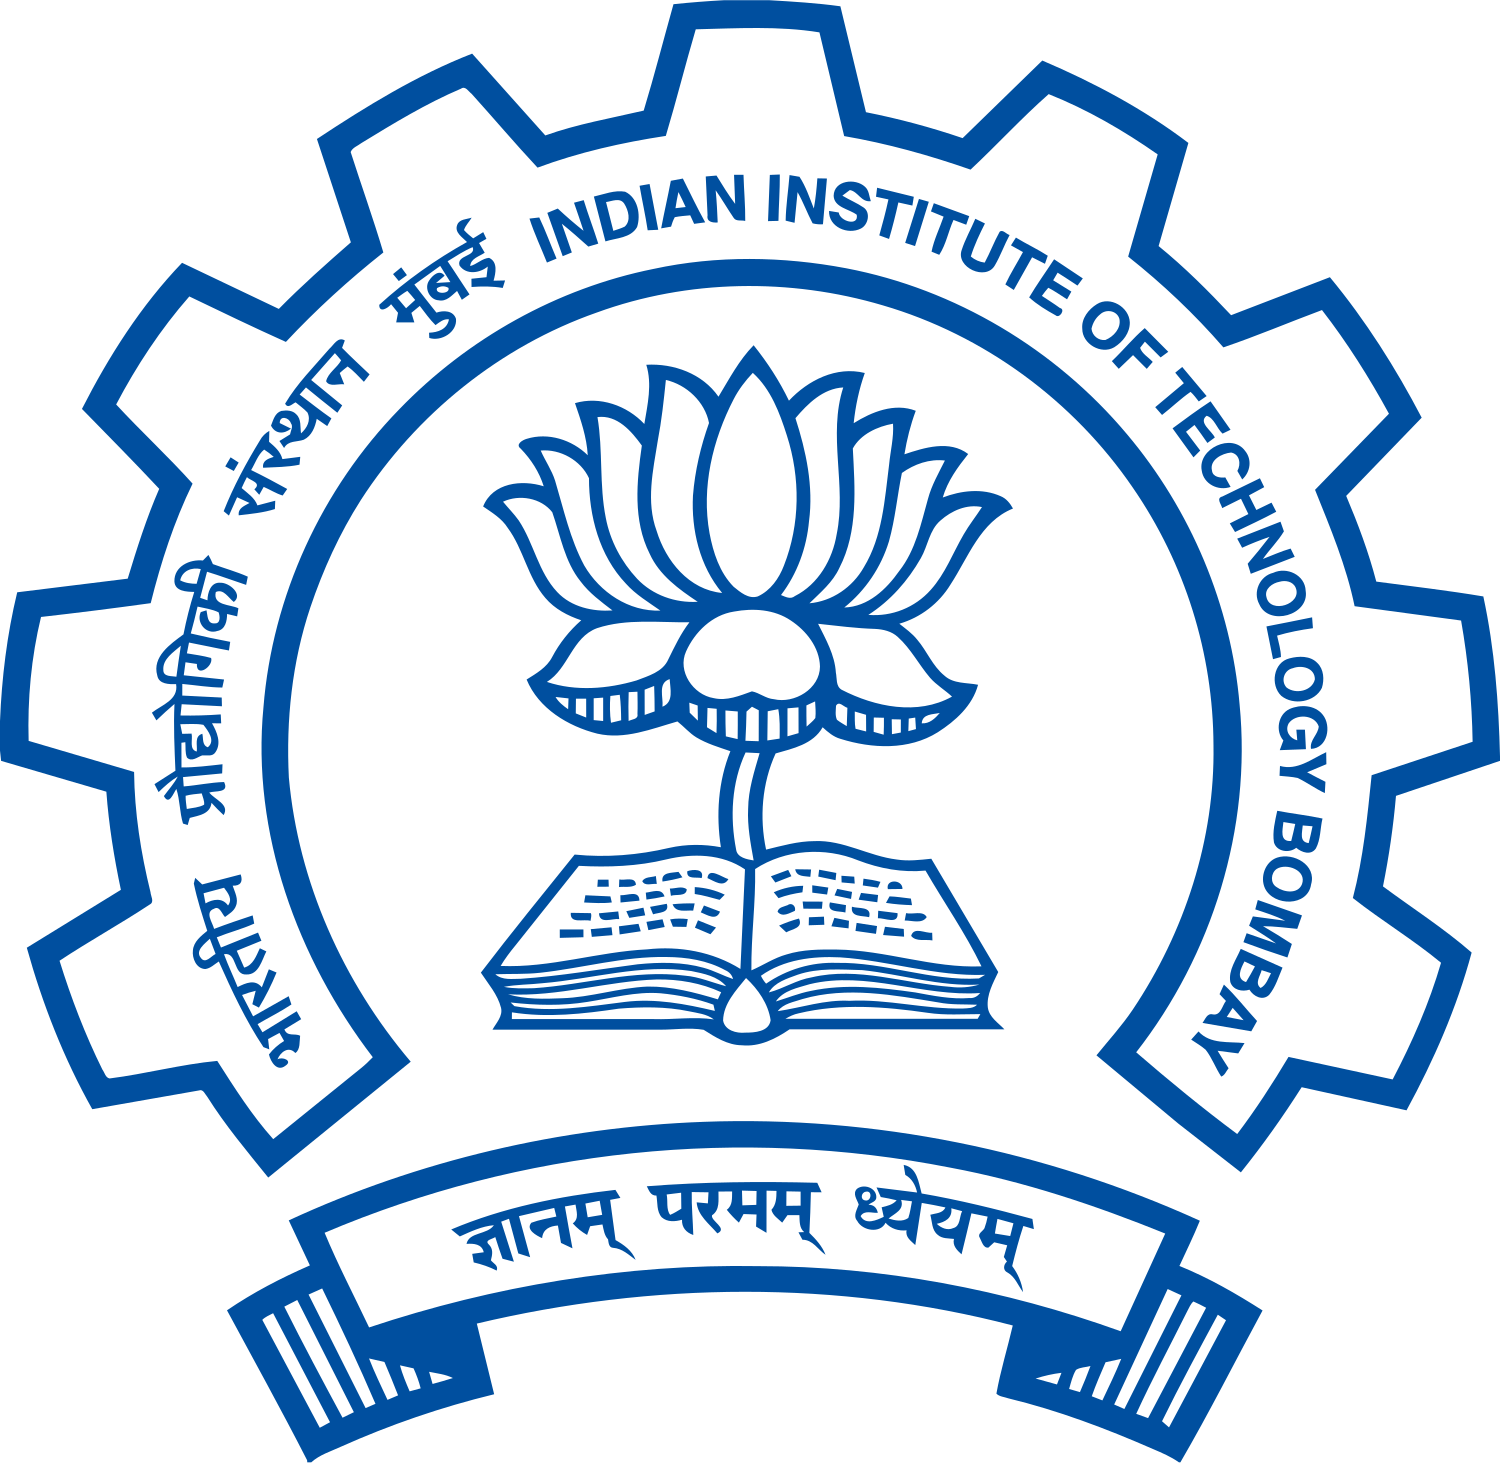 IIT-Bombay to launch dual degree in quantum technology soon, BTech